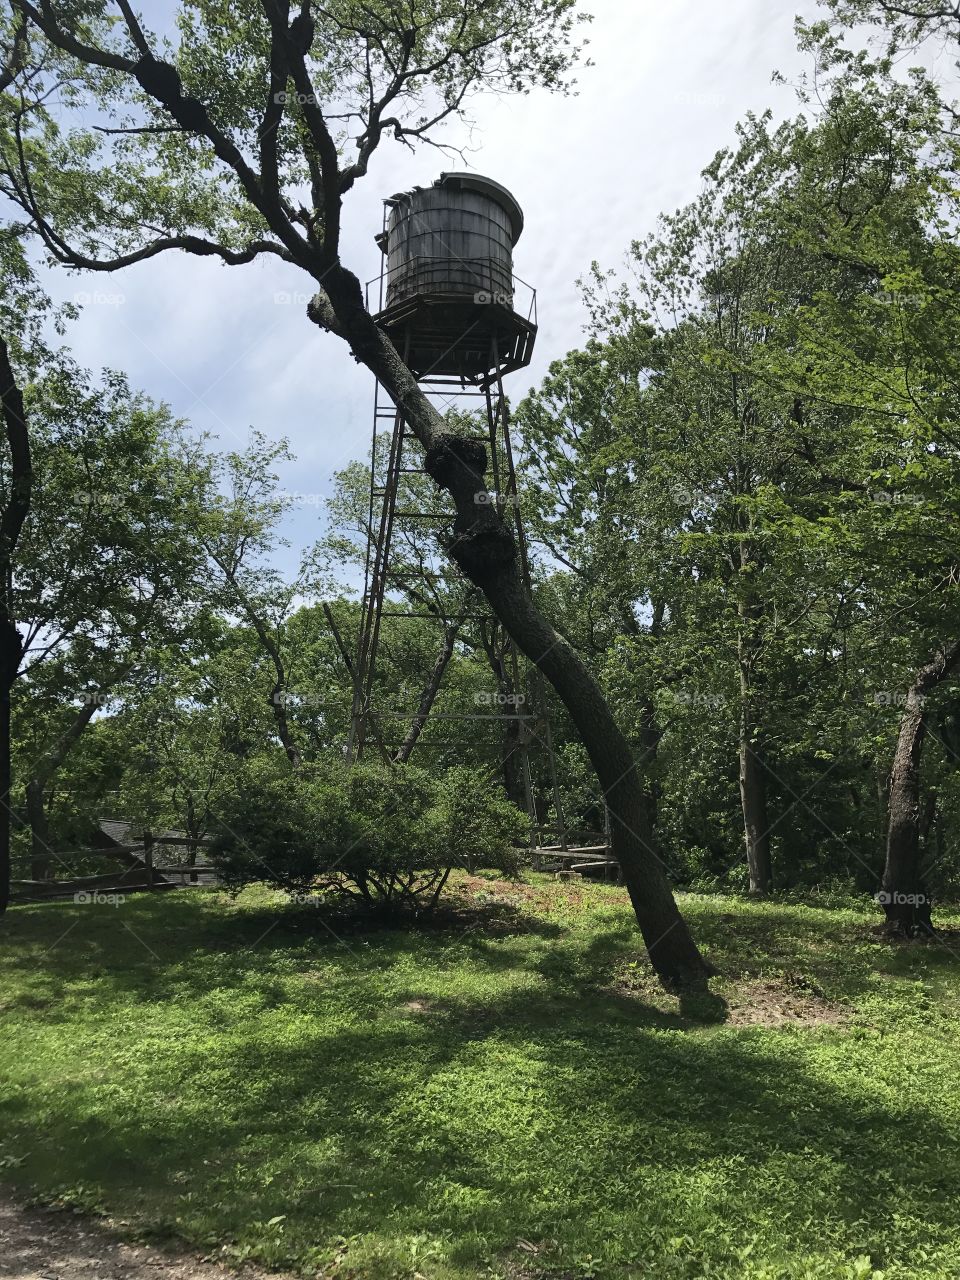 Water tower at Hoyt Farm Nature Preserve, Commack Long Island, New York